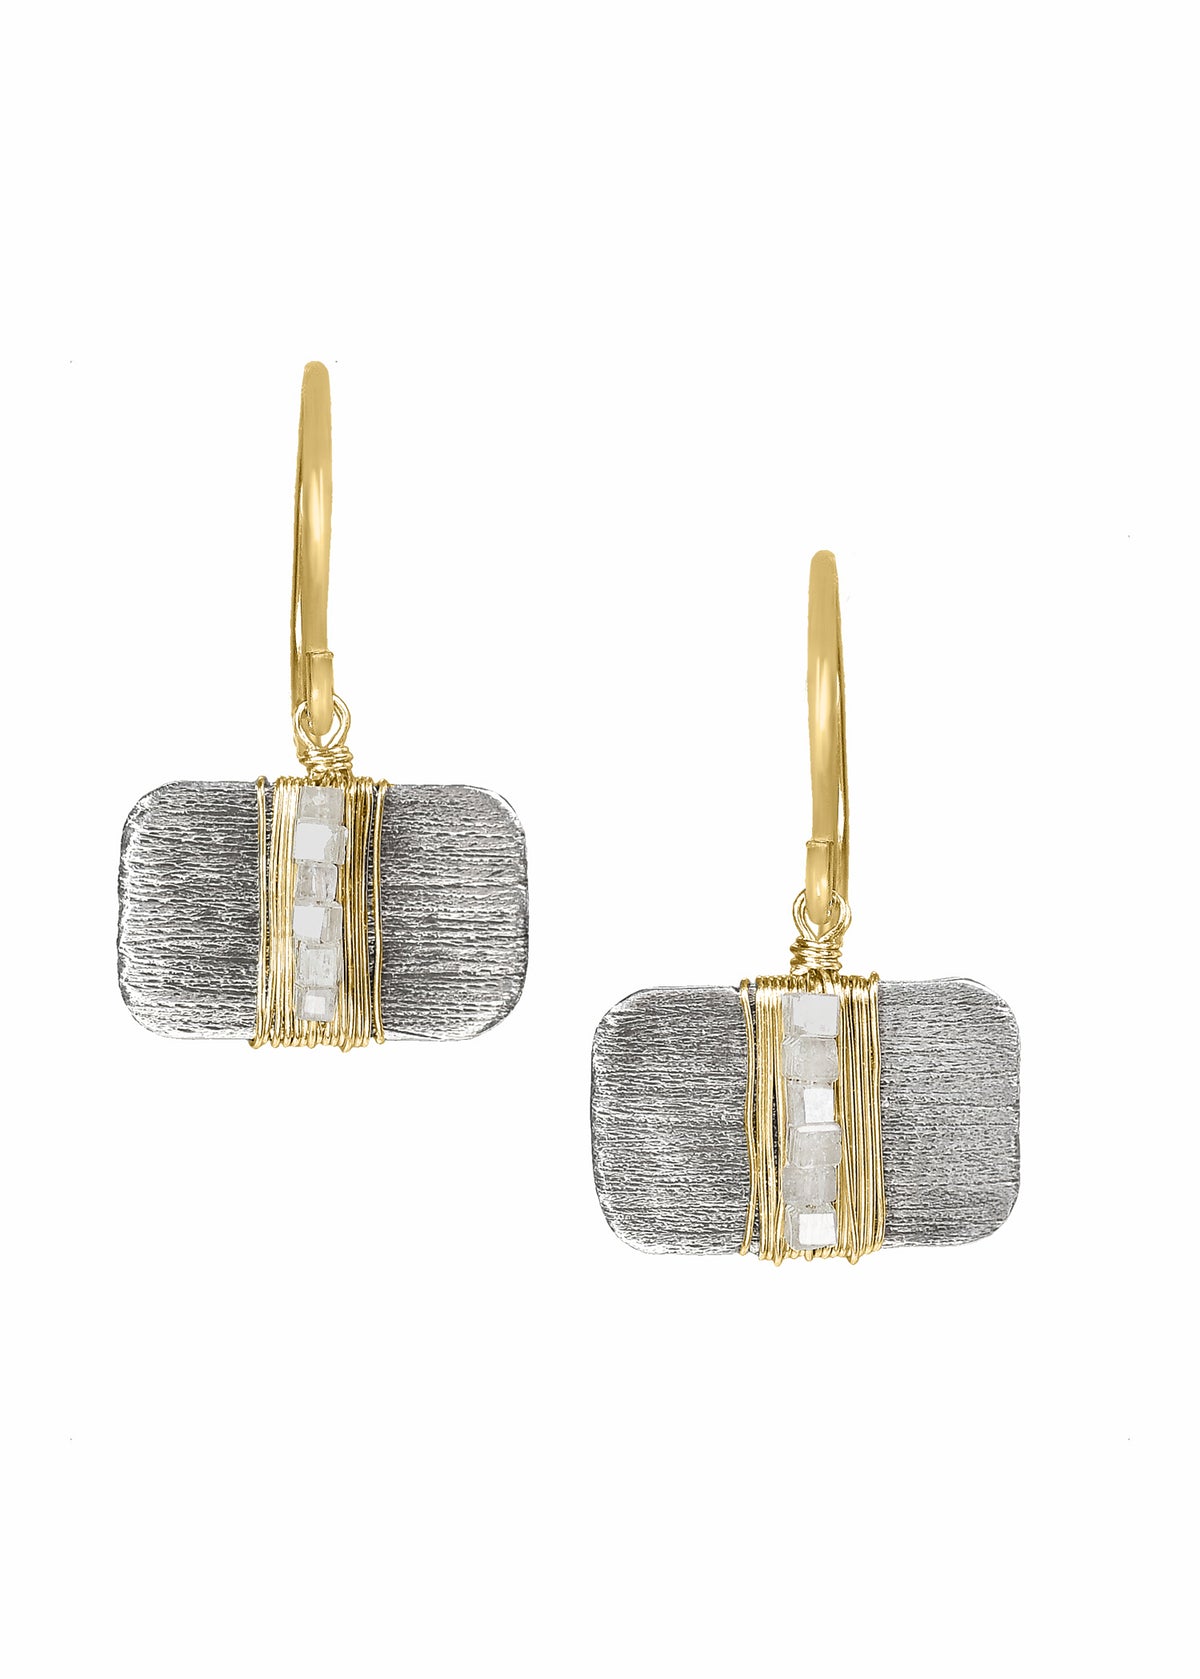 Diamond 14k gold Sterling silver Mixed metal Earrings measure 13/16&quot; in length (including the ear wires) and 1/2&quot; in width Handmade in our Los Angeles studio